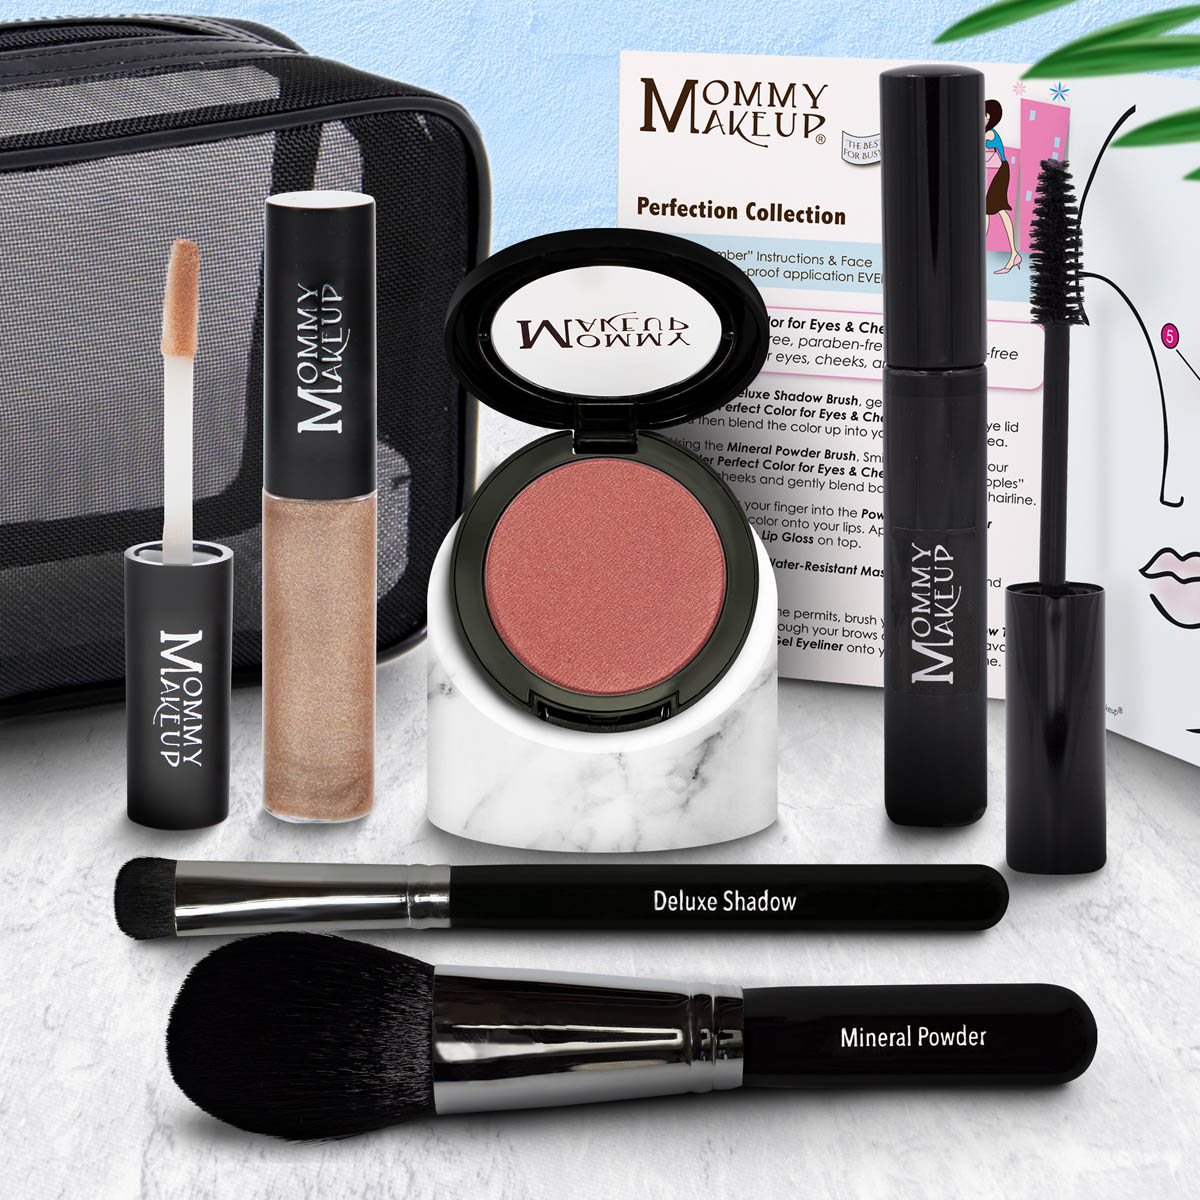 This 6 piece makeup kit is perfect for a quick, ultra easy, radiant look! A fabulous travel-friendly, multi-tasking makeup kit will give you a fresh glowing look that is super simple to apply. Select your own colors!